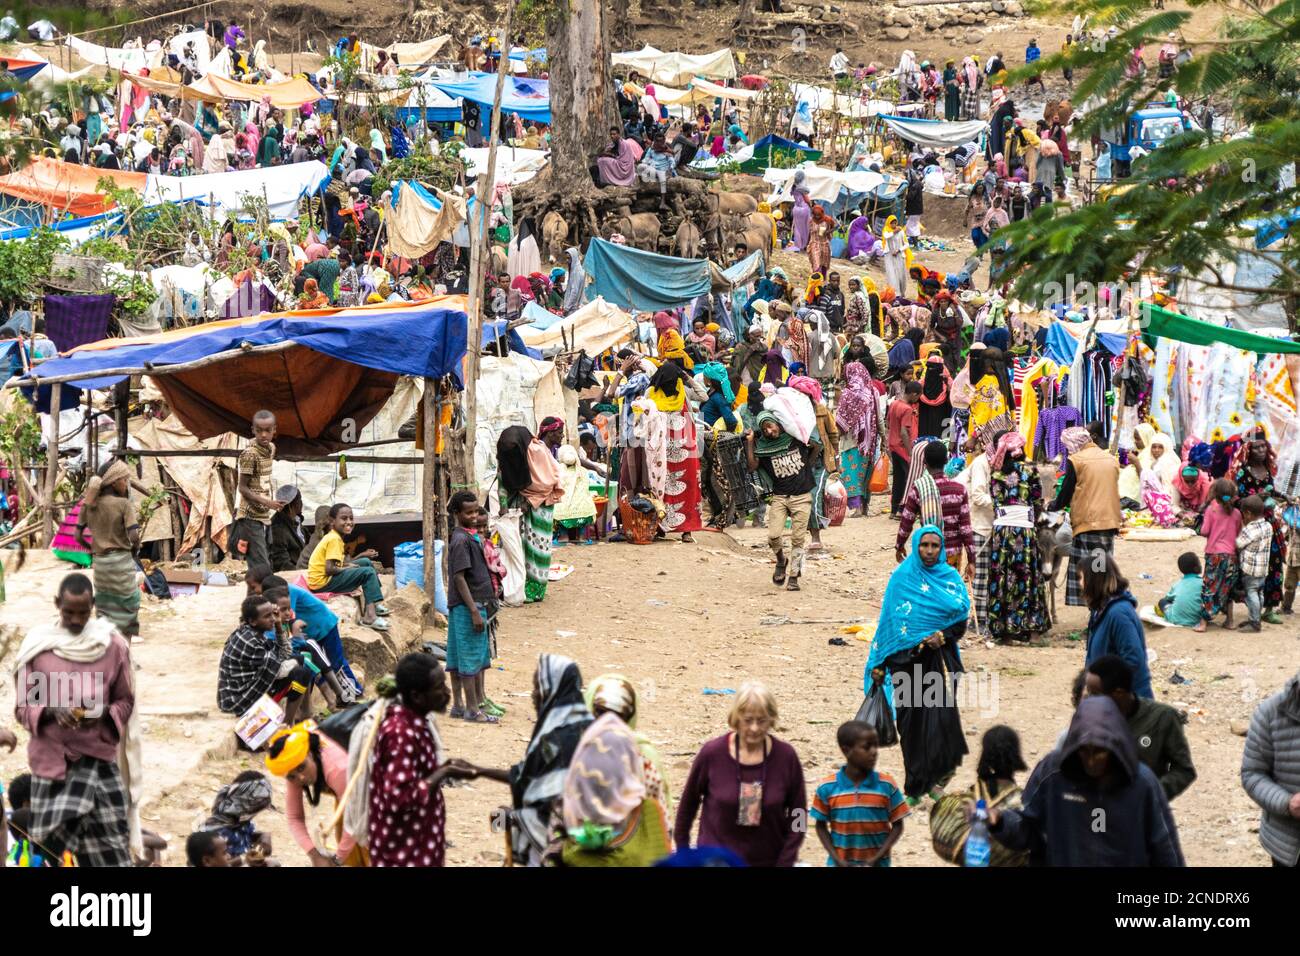 Crowd of people at the open market, Wollo Province, Amhara Region, Ethiopia, Africa Stock Photo